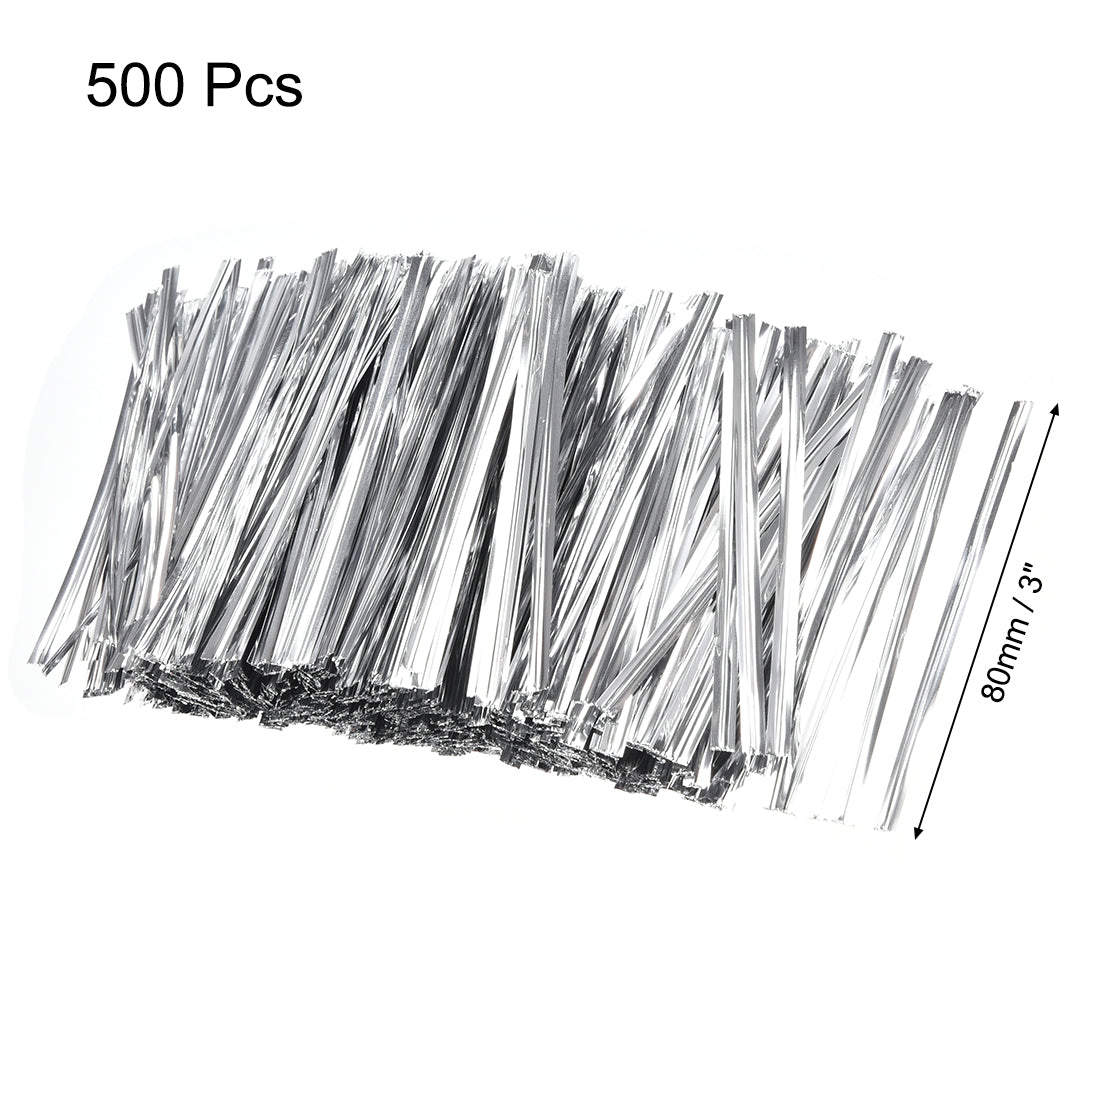 uxcell Uxcell Long Strong Twist Ties 3.15 Inches Quality Plastic Closure Tie for Tying Gift Bags Art Craft Ties Manage Cords Silvery 500pcs